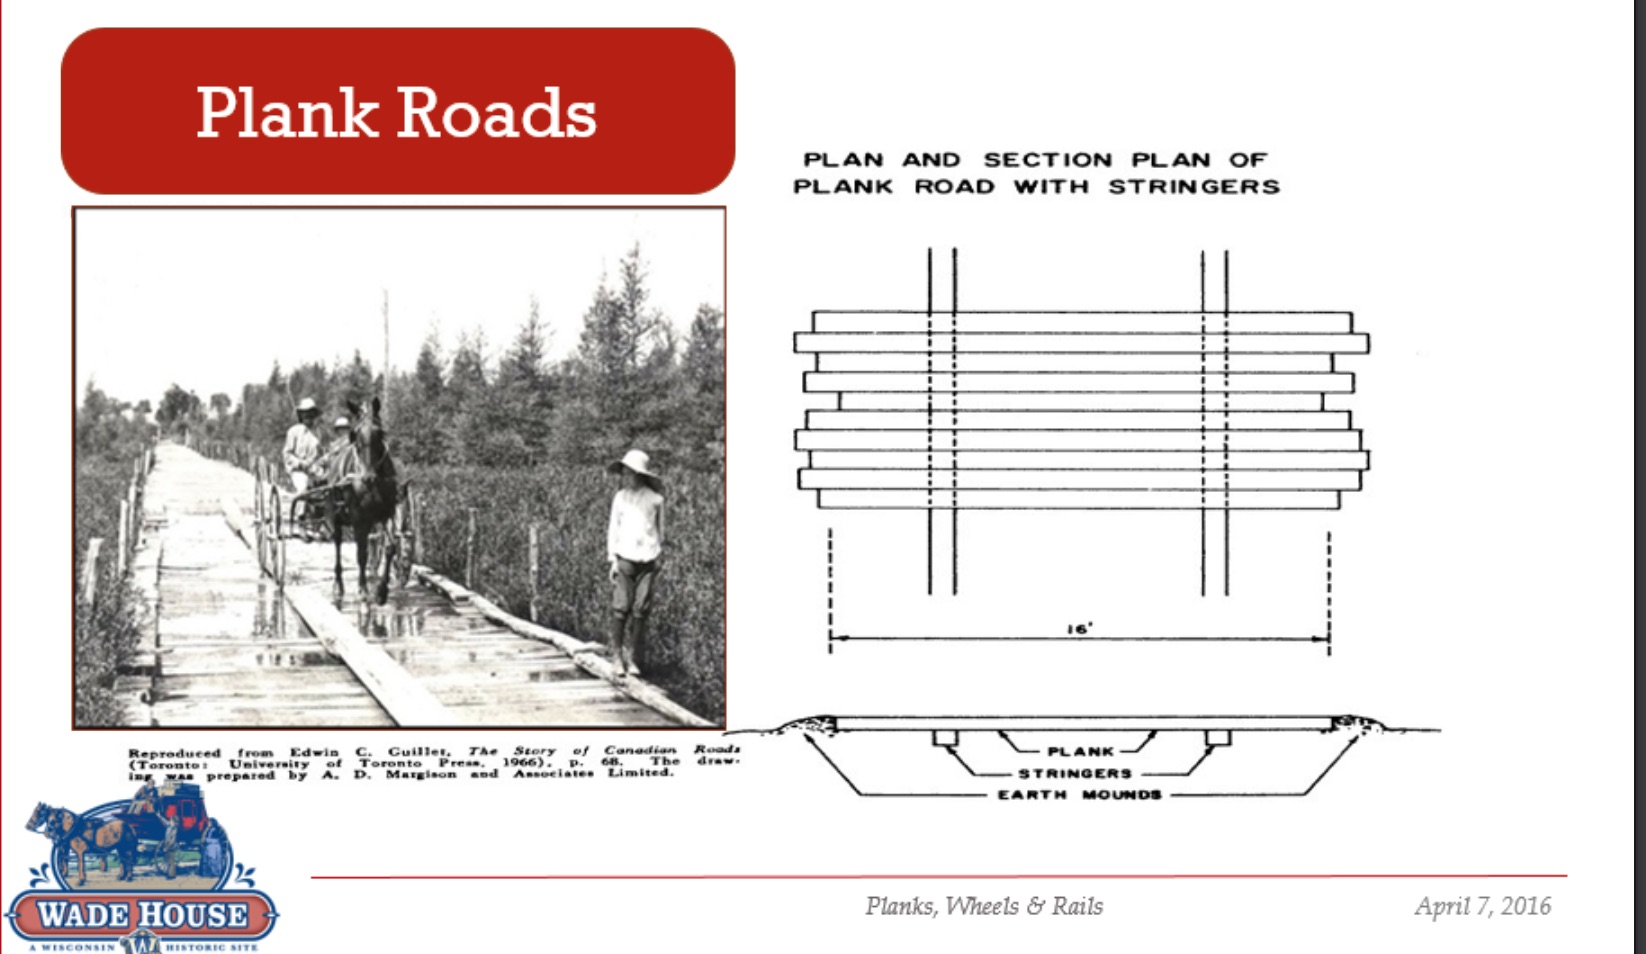 On the left, you can see people traveling along the plank road. On the right, there is a diagram of how the plank road was made. 